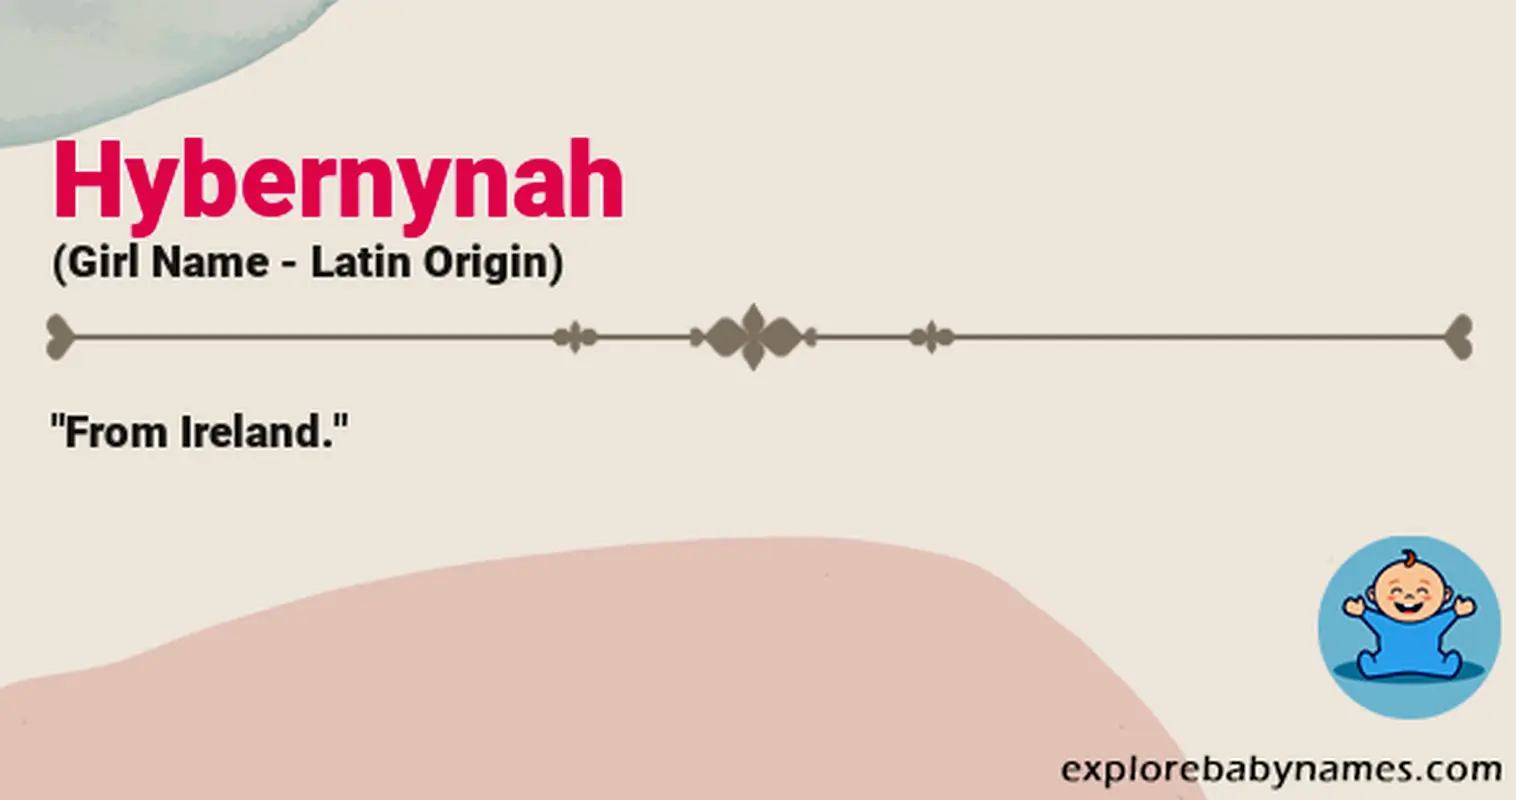 Meaning of Hybernynah